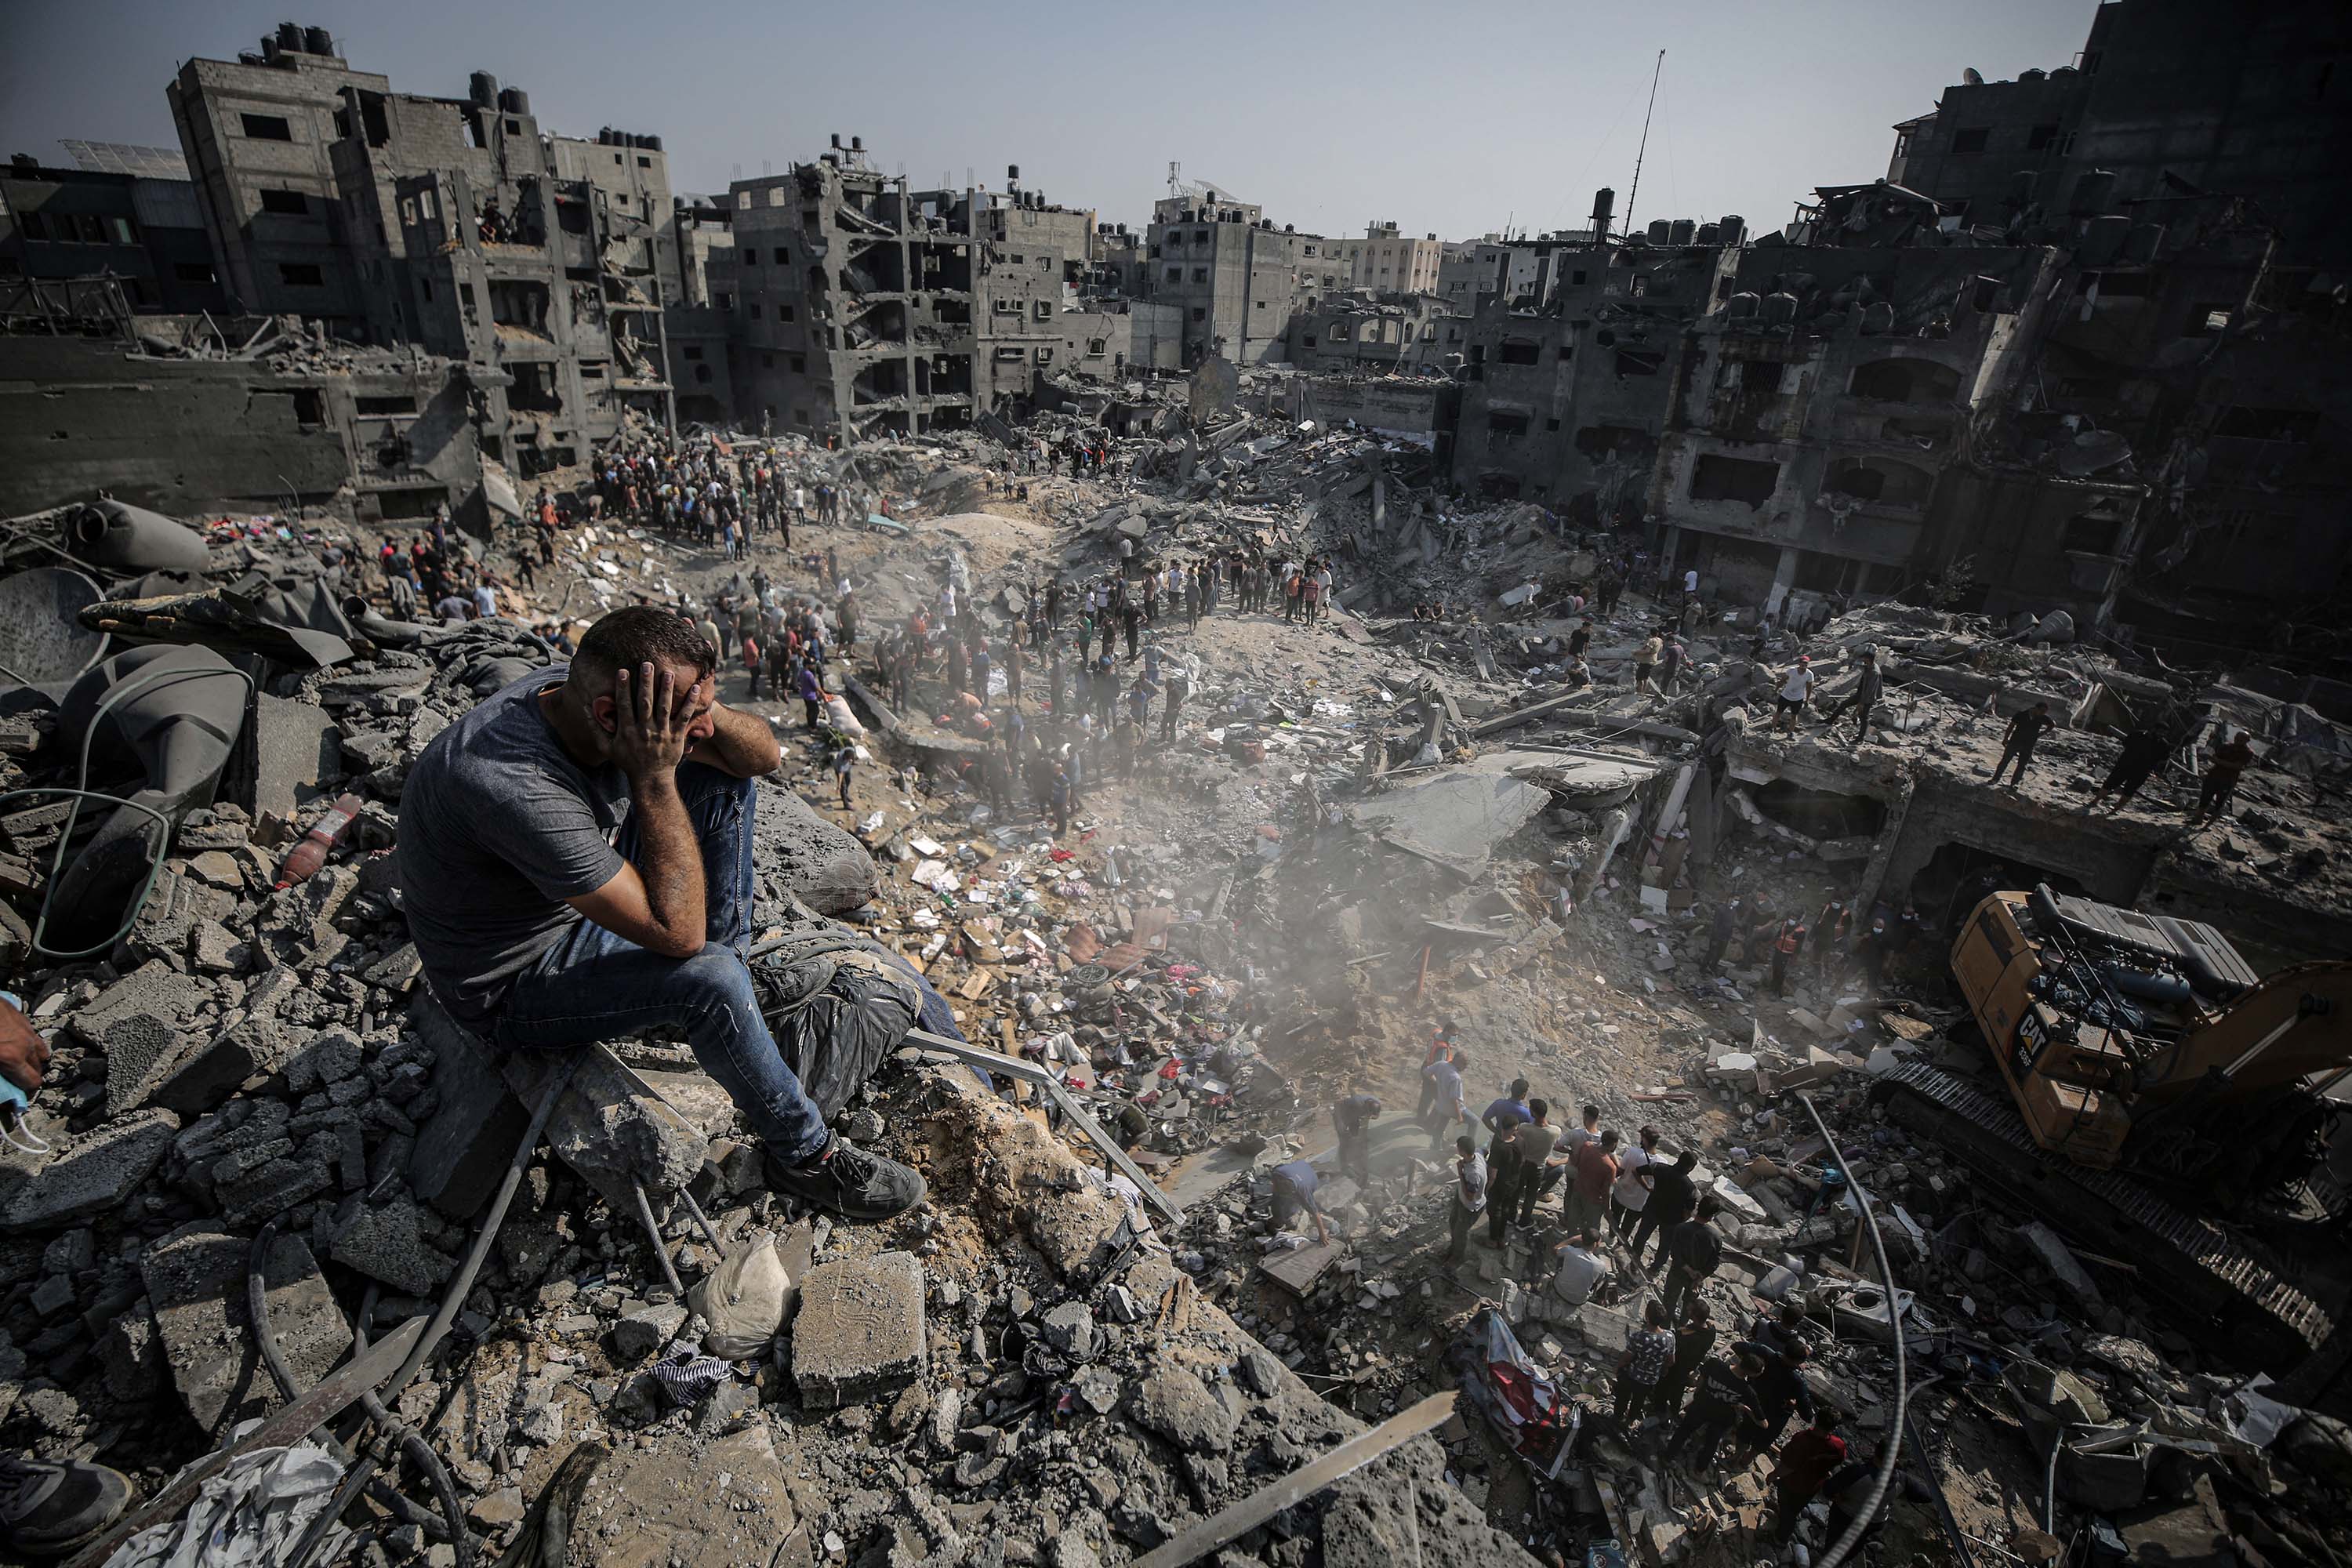 A man sits on debris as Palestinians conduct a search and rescue operation after the second bombardment to the Jabalya refugee camp in Gaza City, on Wednesday, November 1.